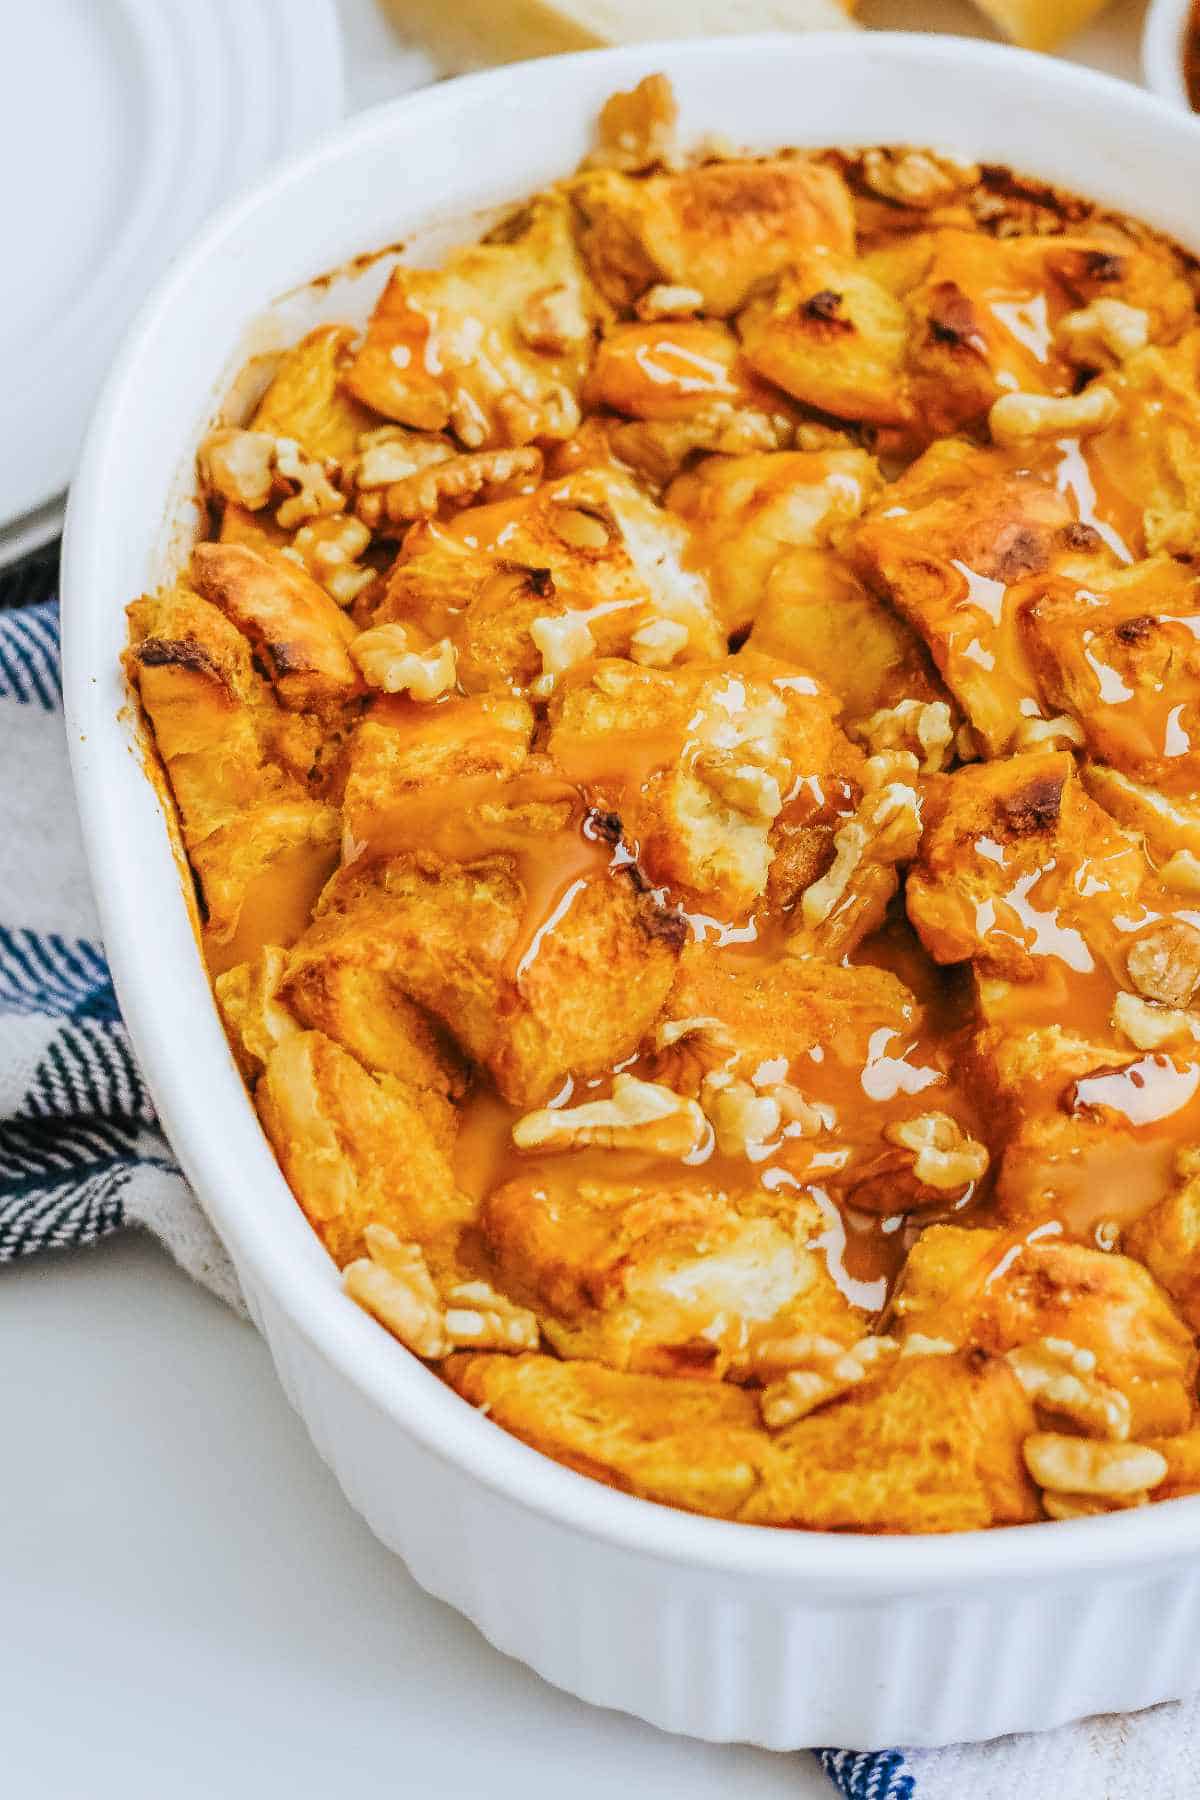 baked bread pudding with nuts scattered on top in an oval white deep dish casserole.